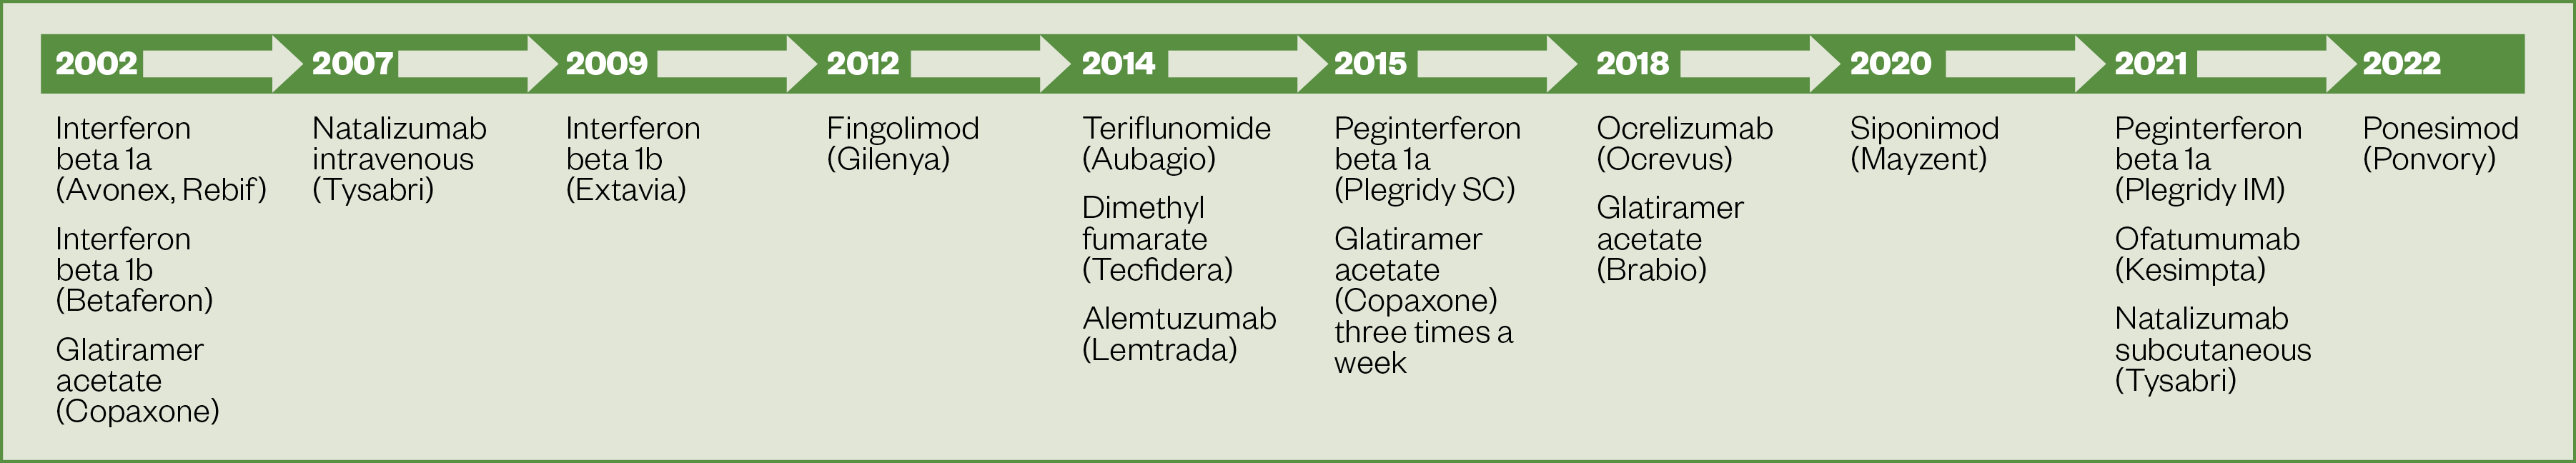 Figure 2 DMT timeline infographic describing when disease-modifying therapies became available for use in England 